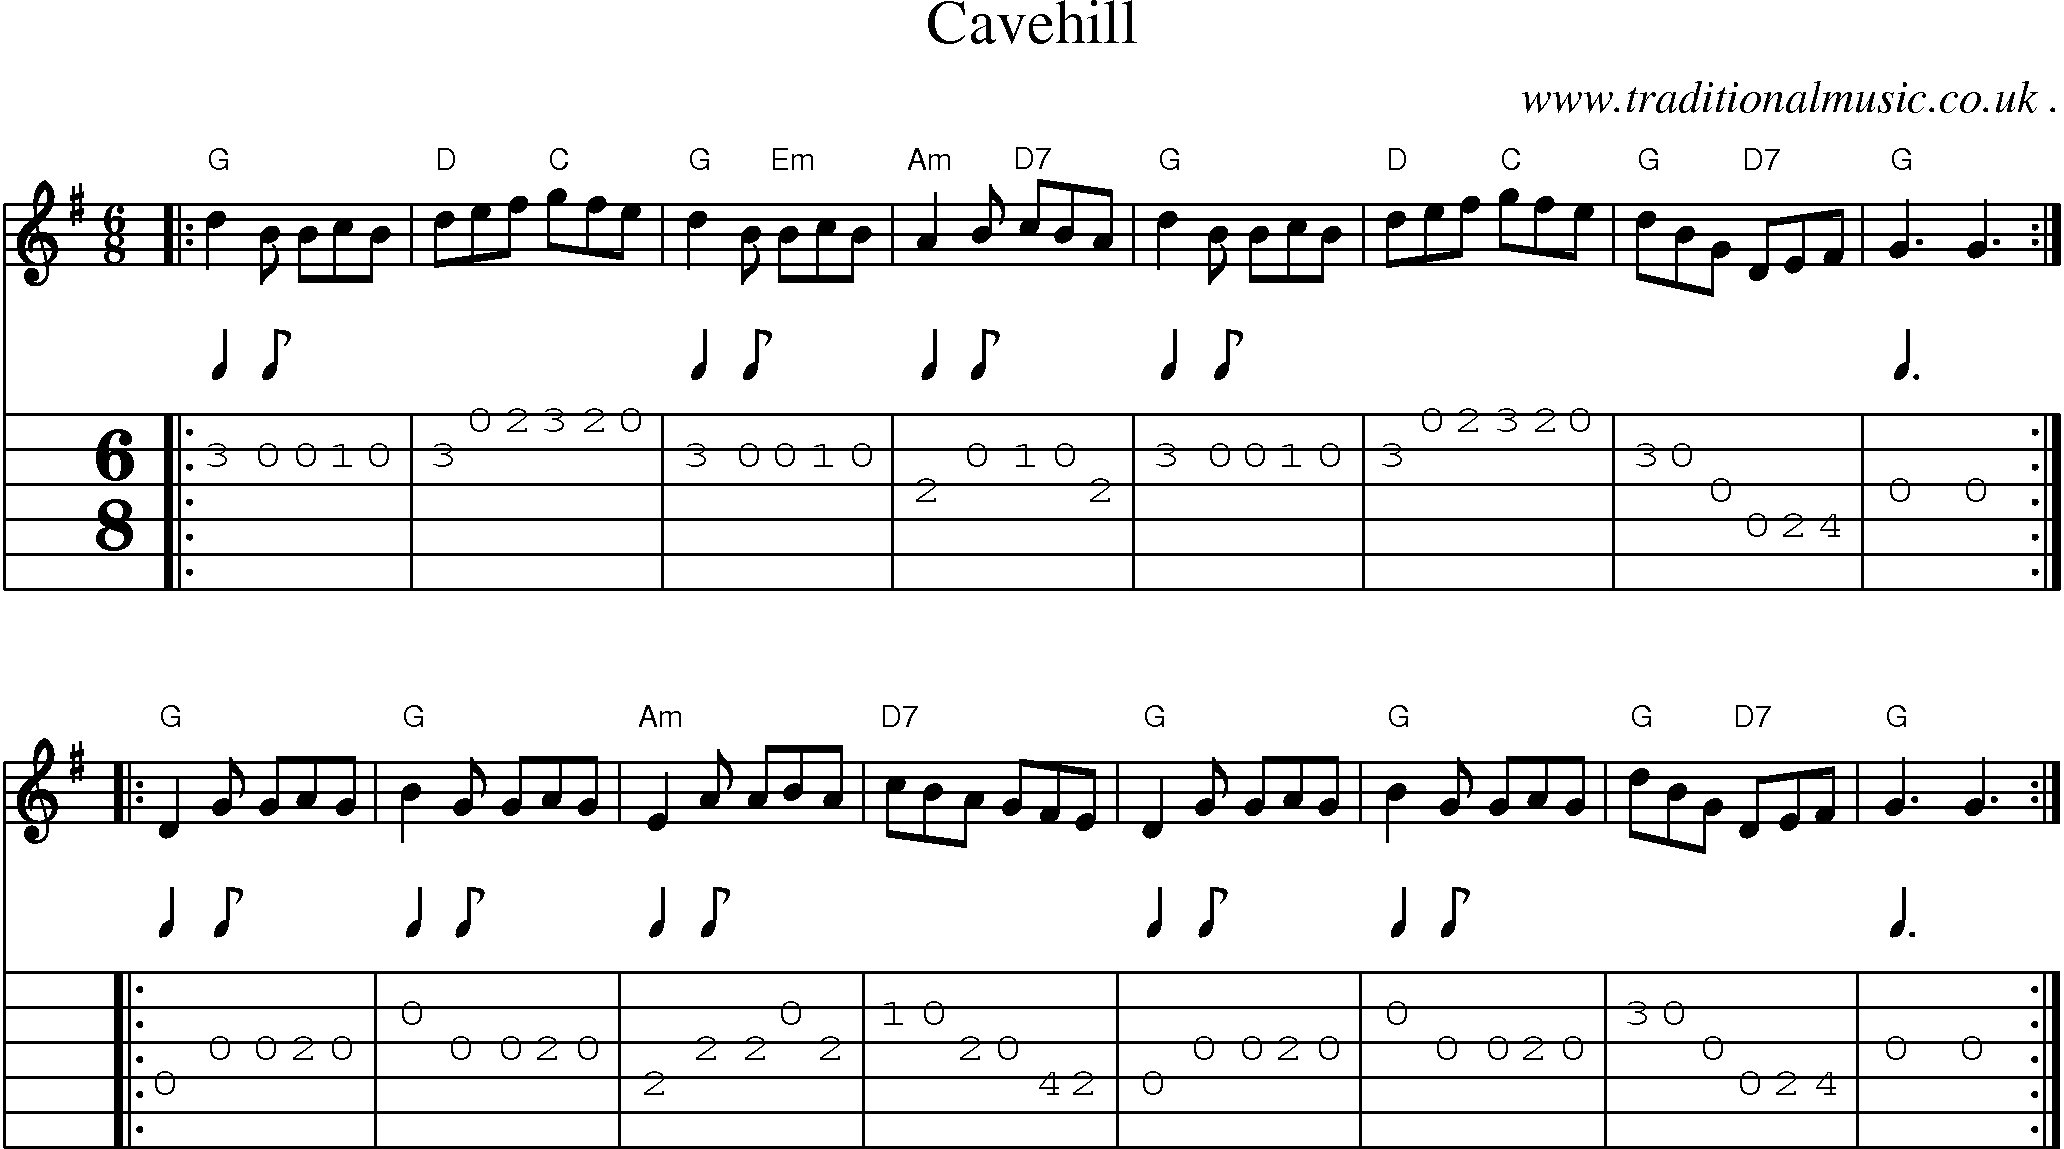 Sheet-music  score, Chords and Guitar Tabs for Cavehill